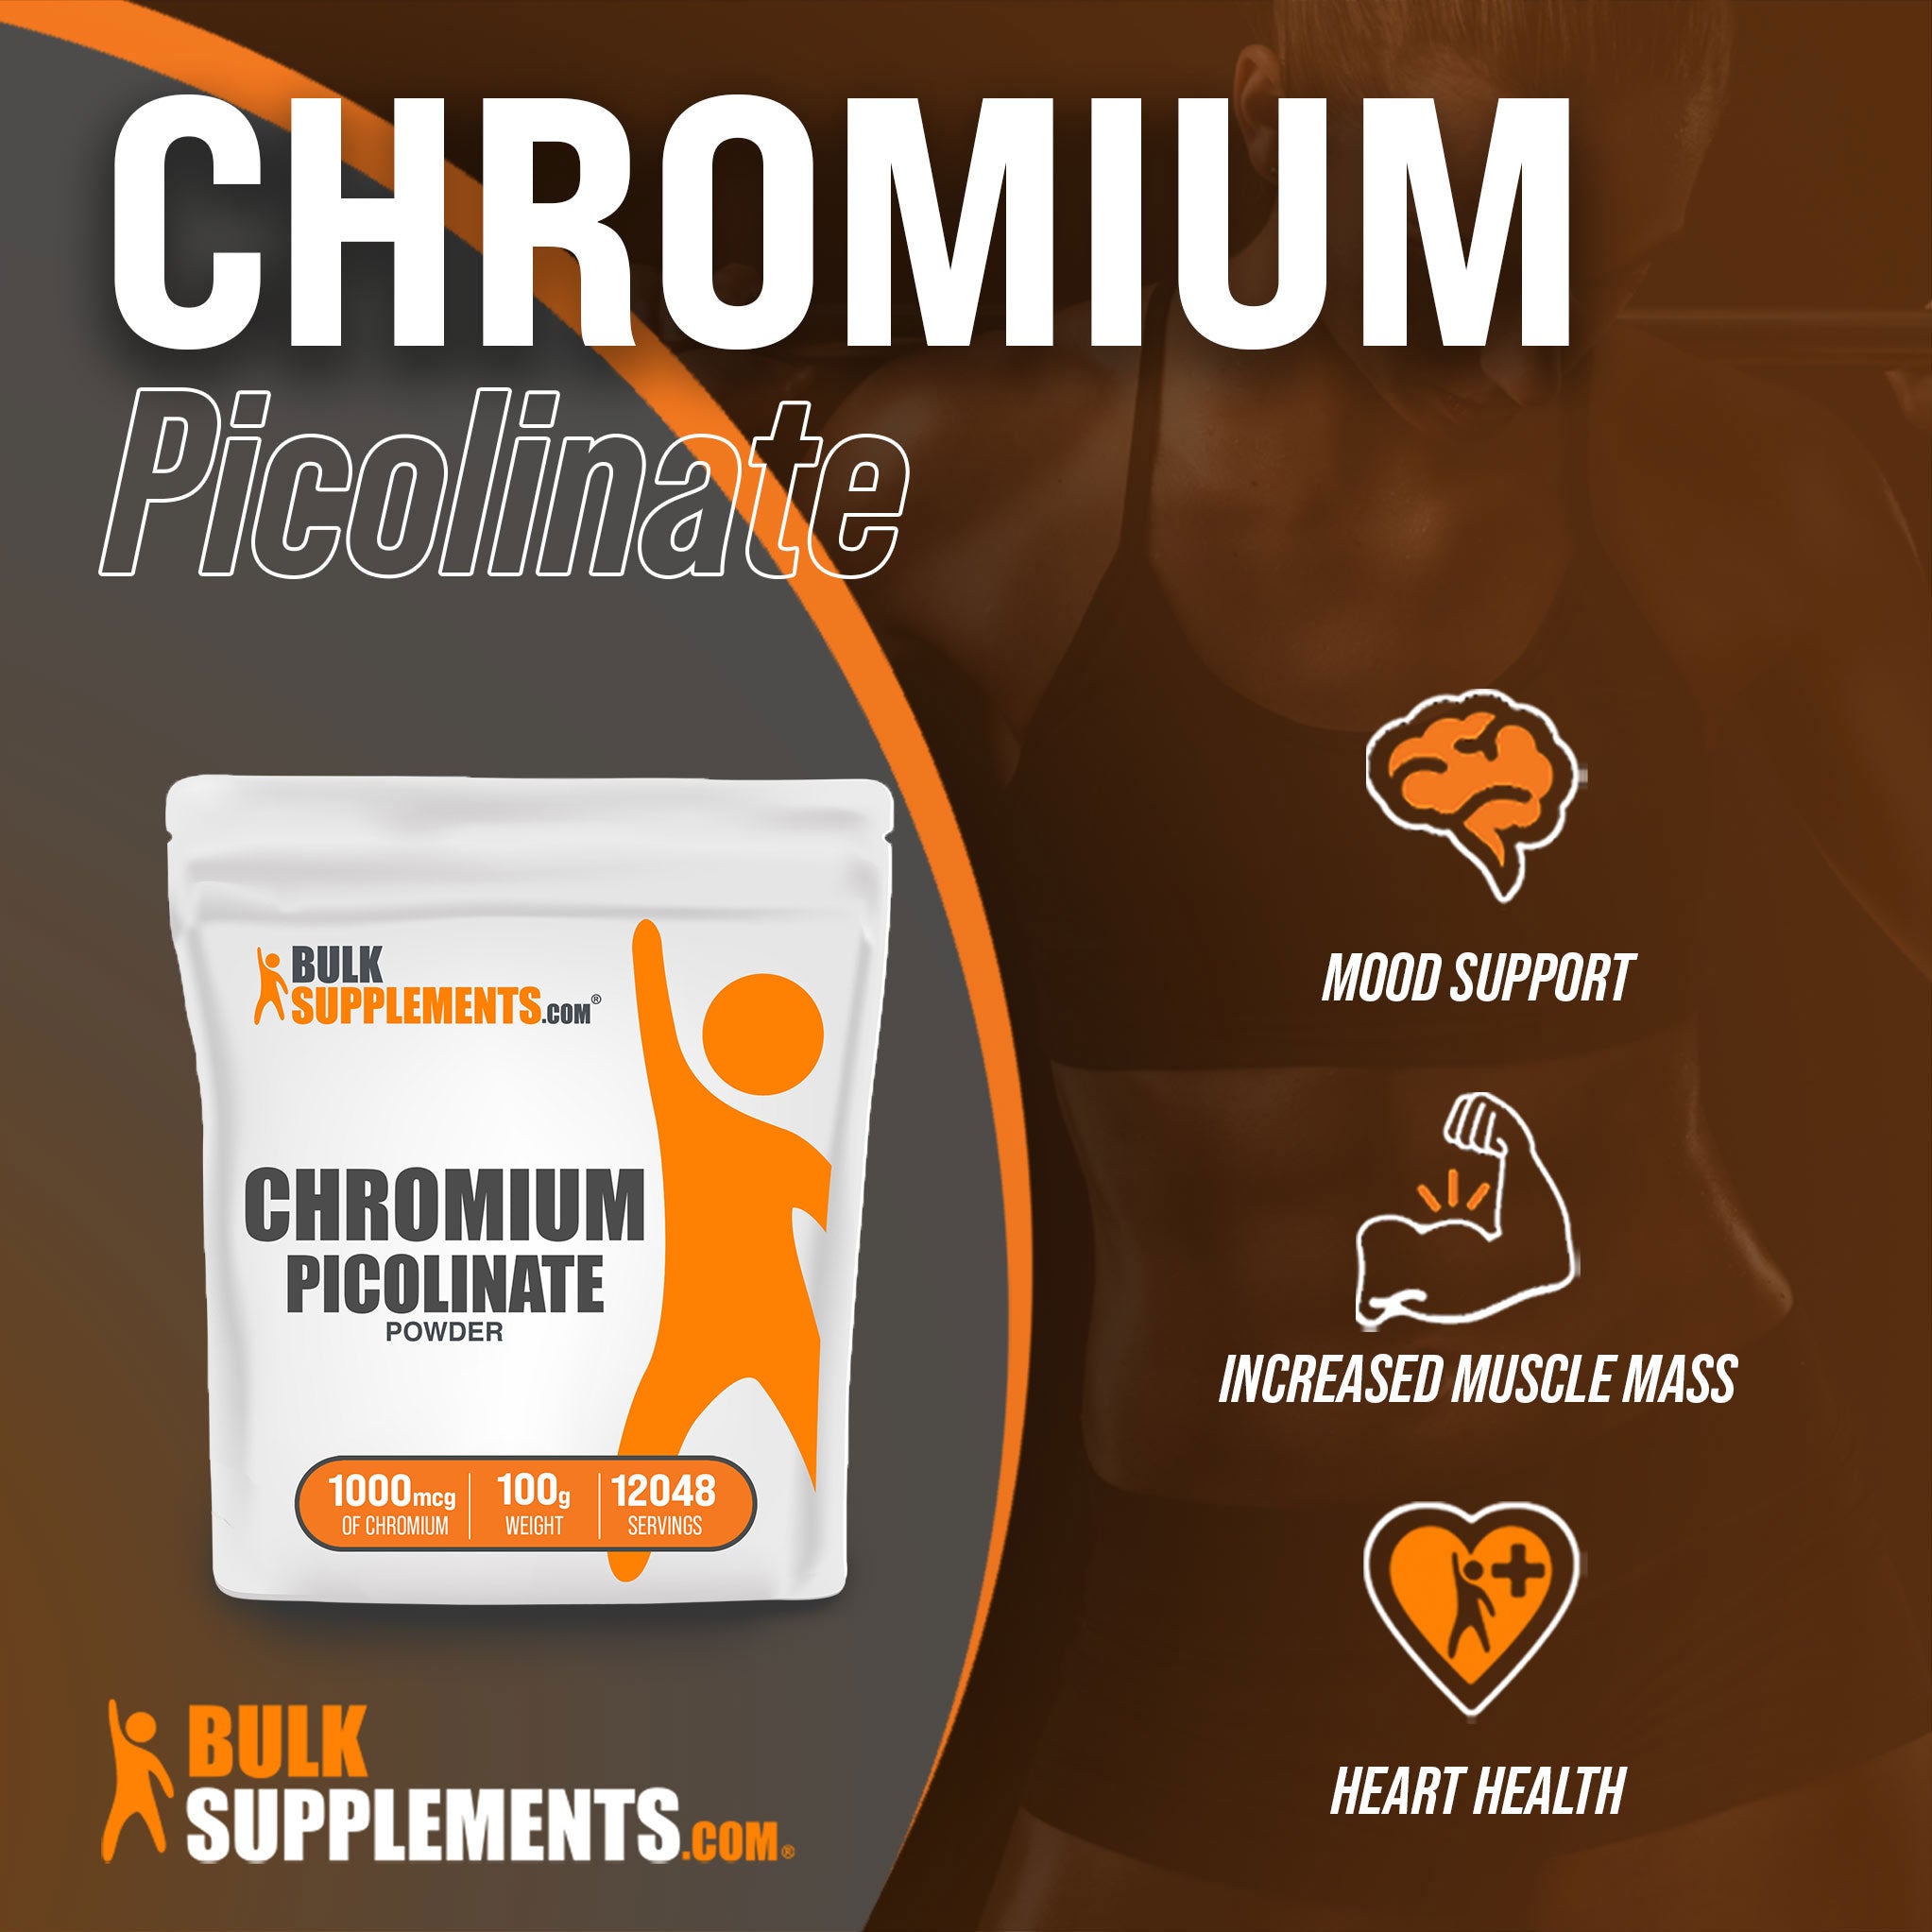 100g of chromium picolinate 1000mcg for weight loss, mood support and more